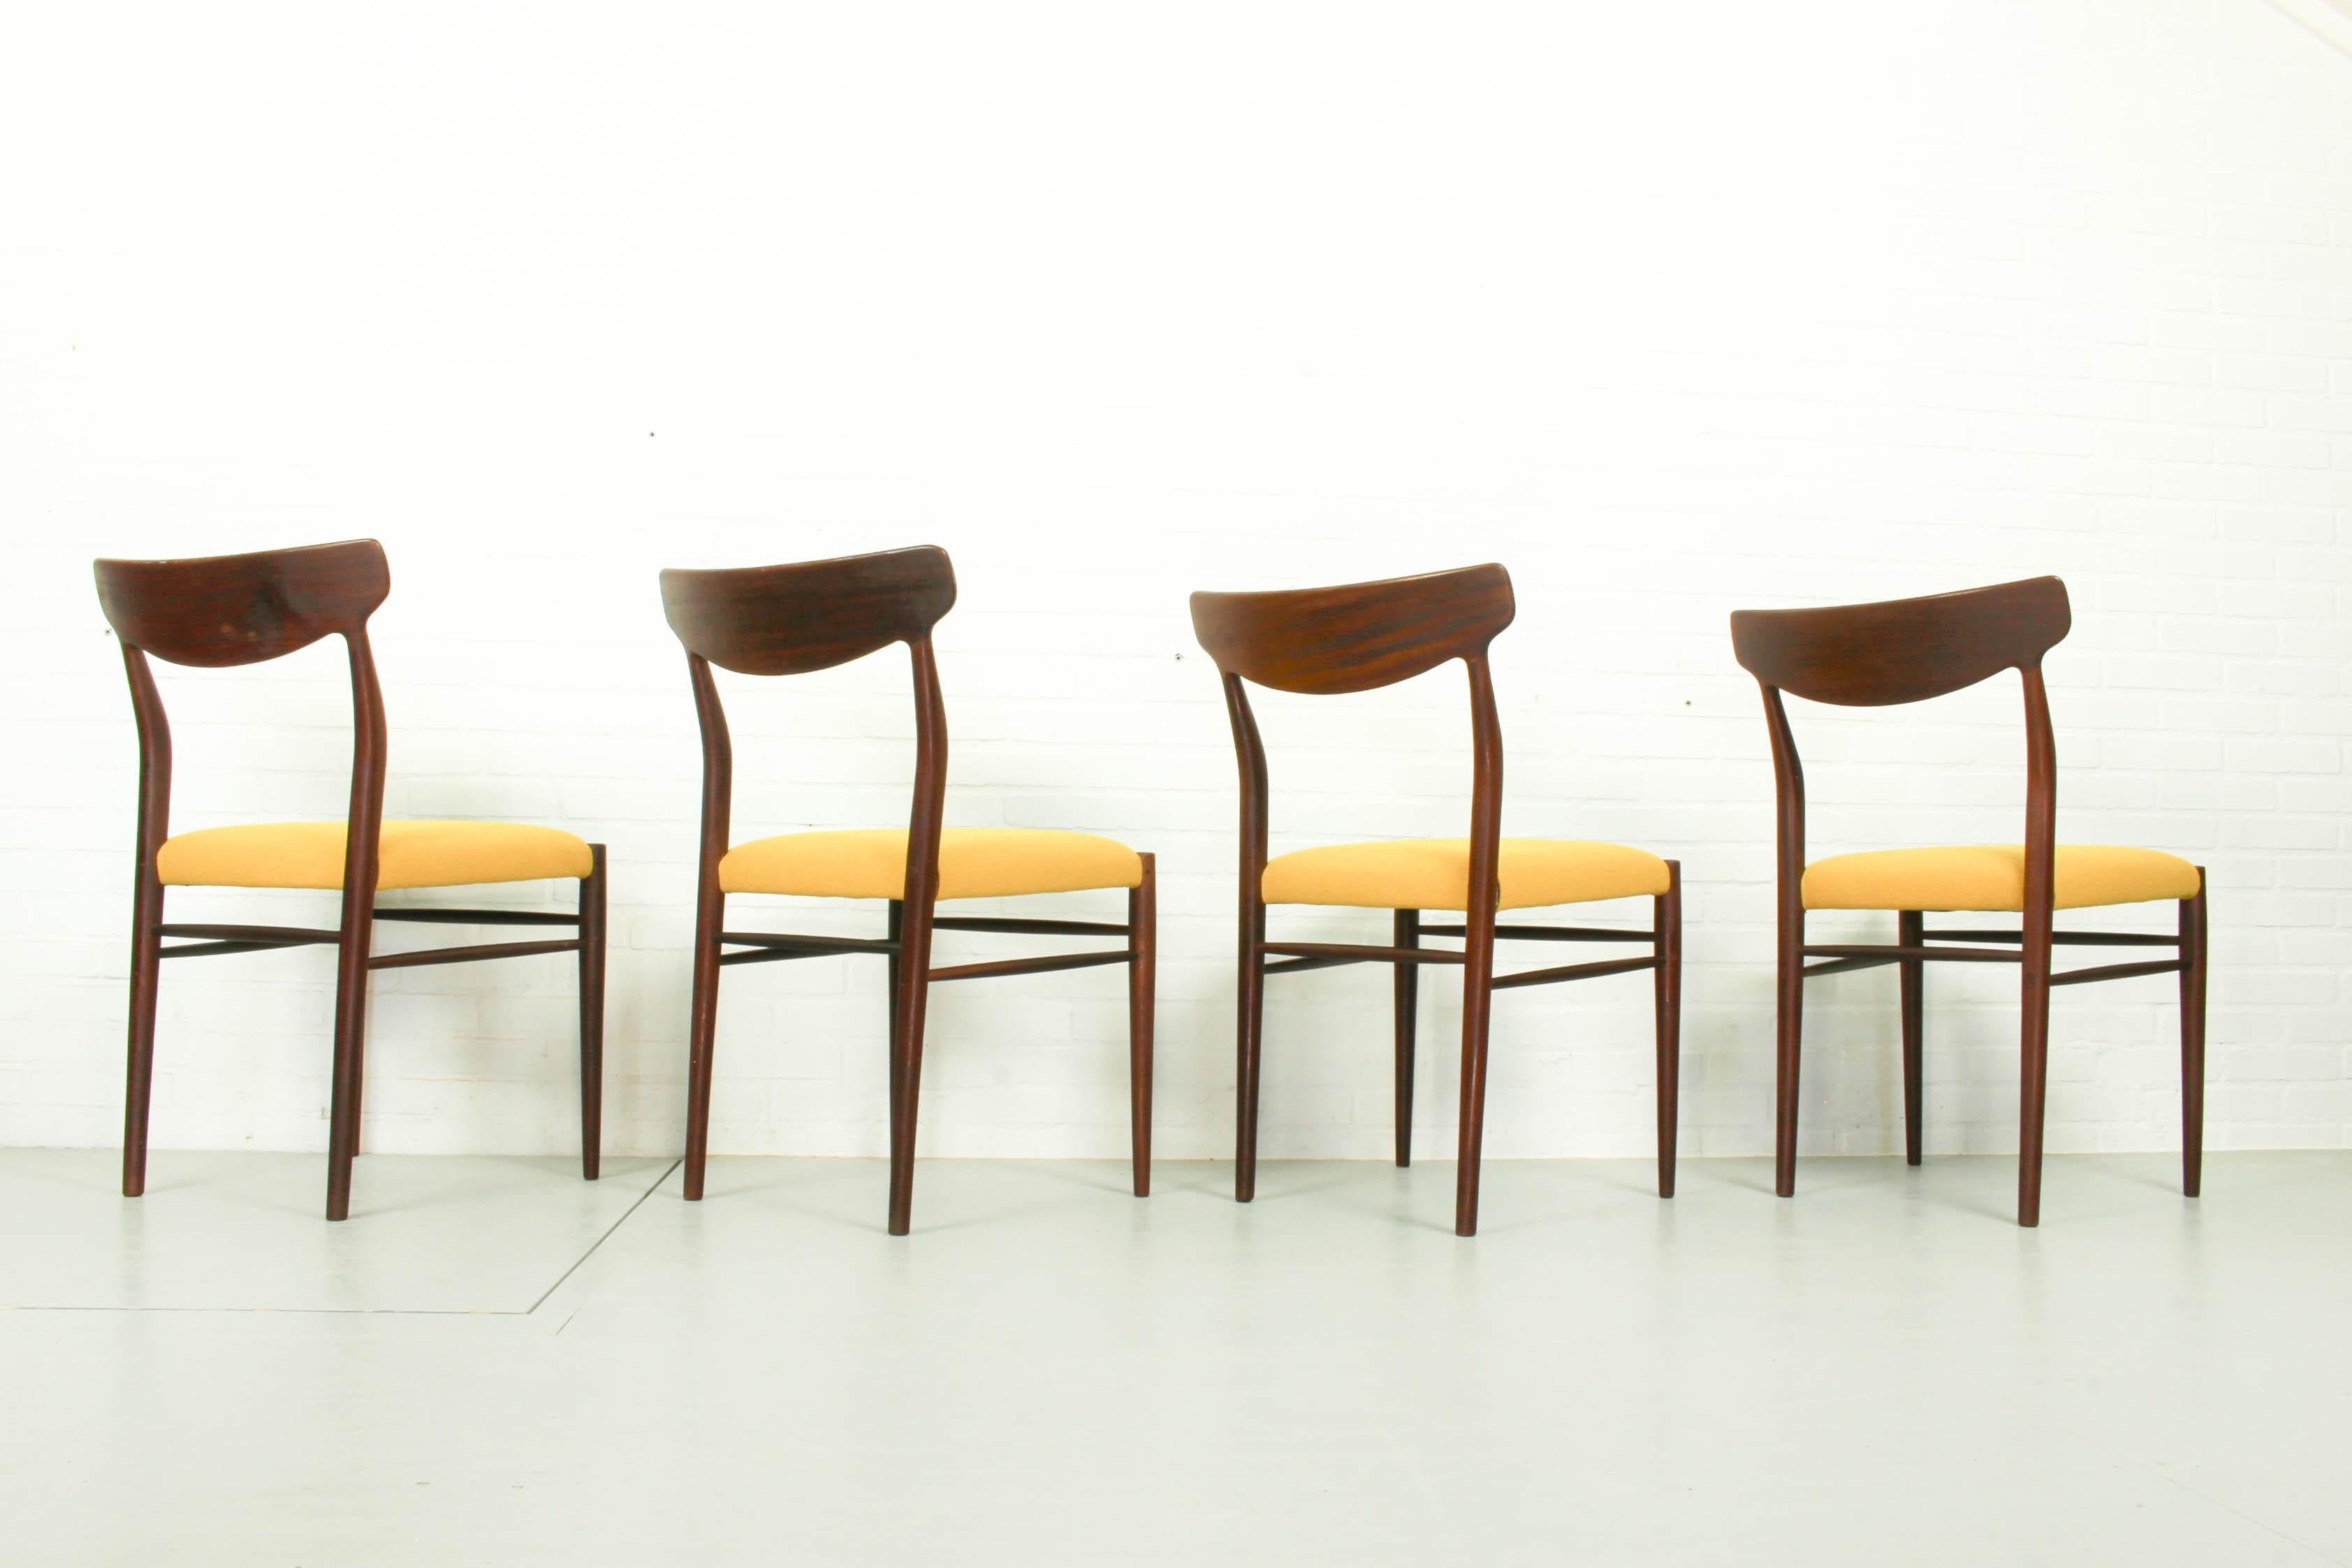 20th Century Set of 4 Teak Dining Chairs by Harry Ostergaard, 1950s